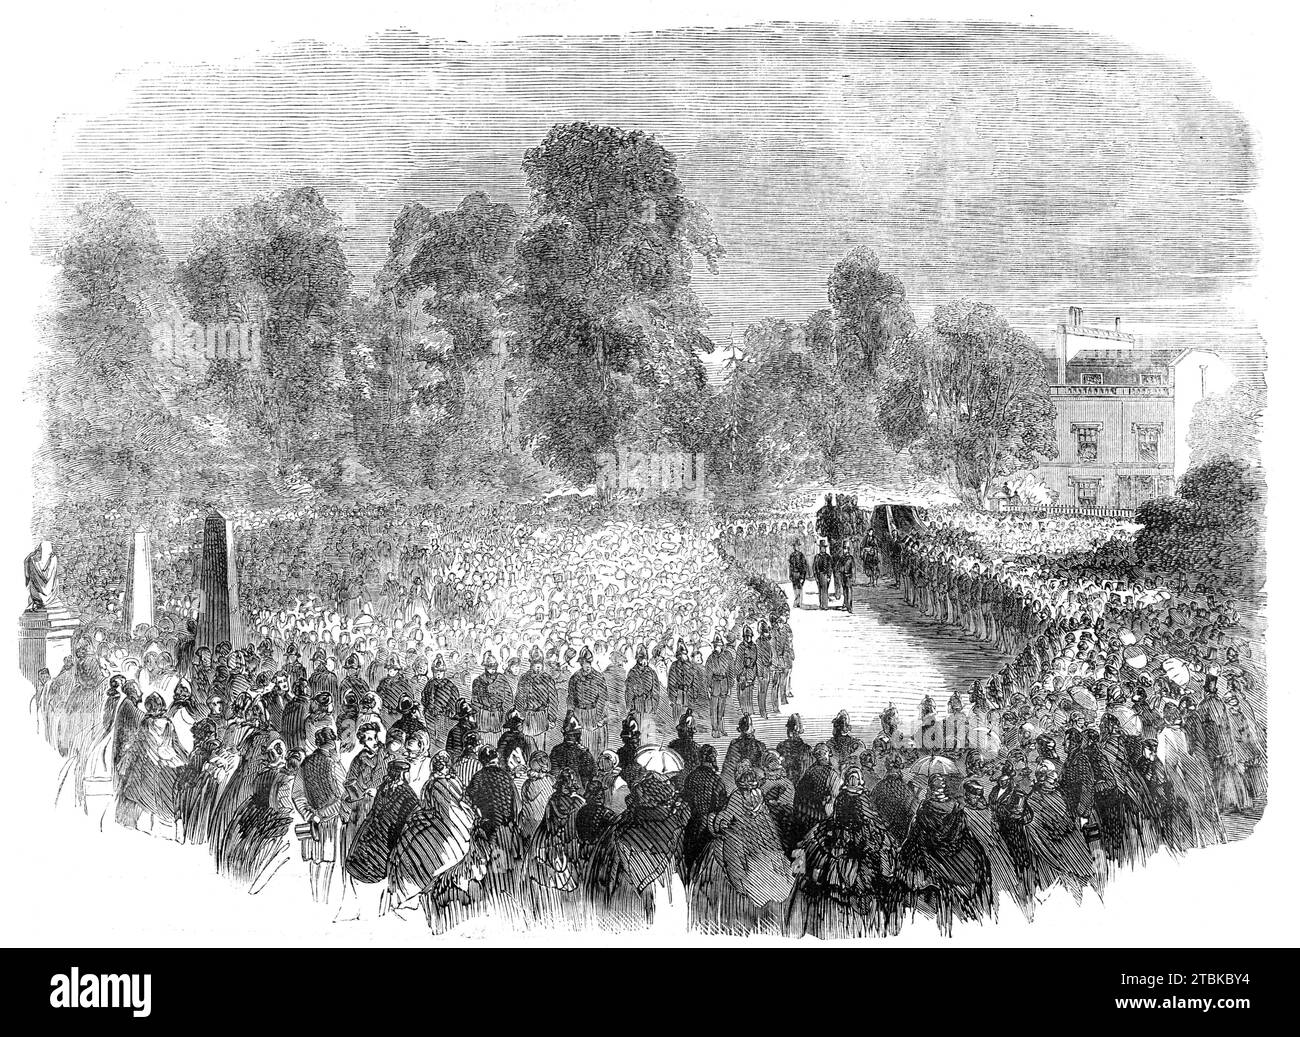 Funeral of Mr. Braidwood, the late Chief of the London Fire Brigade, in Abney-Park Cemetery, 1861. Braidwood died in the Tooley Street fire. 'Seldom if ever before in London has such a marked tribute of public respect been paid to a private individual. The London Rifle Brigade, the Tower Hamlets Volunteers, all the public and private fire brigades...formed part of the procession, which extended upwards of a mile in length. Every avenue...was blocked by a dense and almost impenetrable crowd, while throughout the entire length of the route along which it was to pass every path was thronged...The Stock Photo